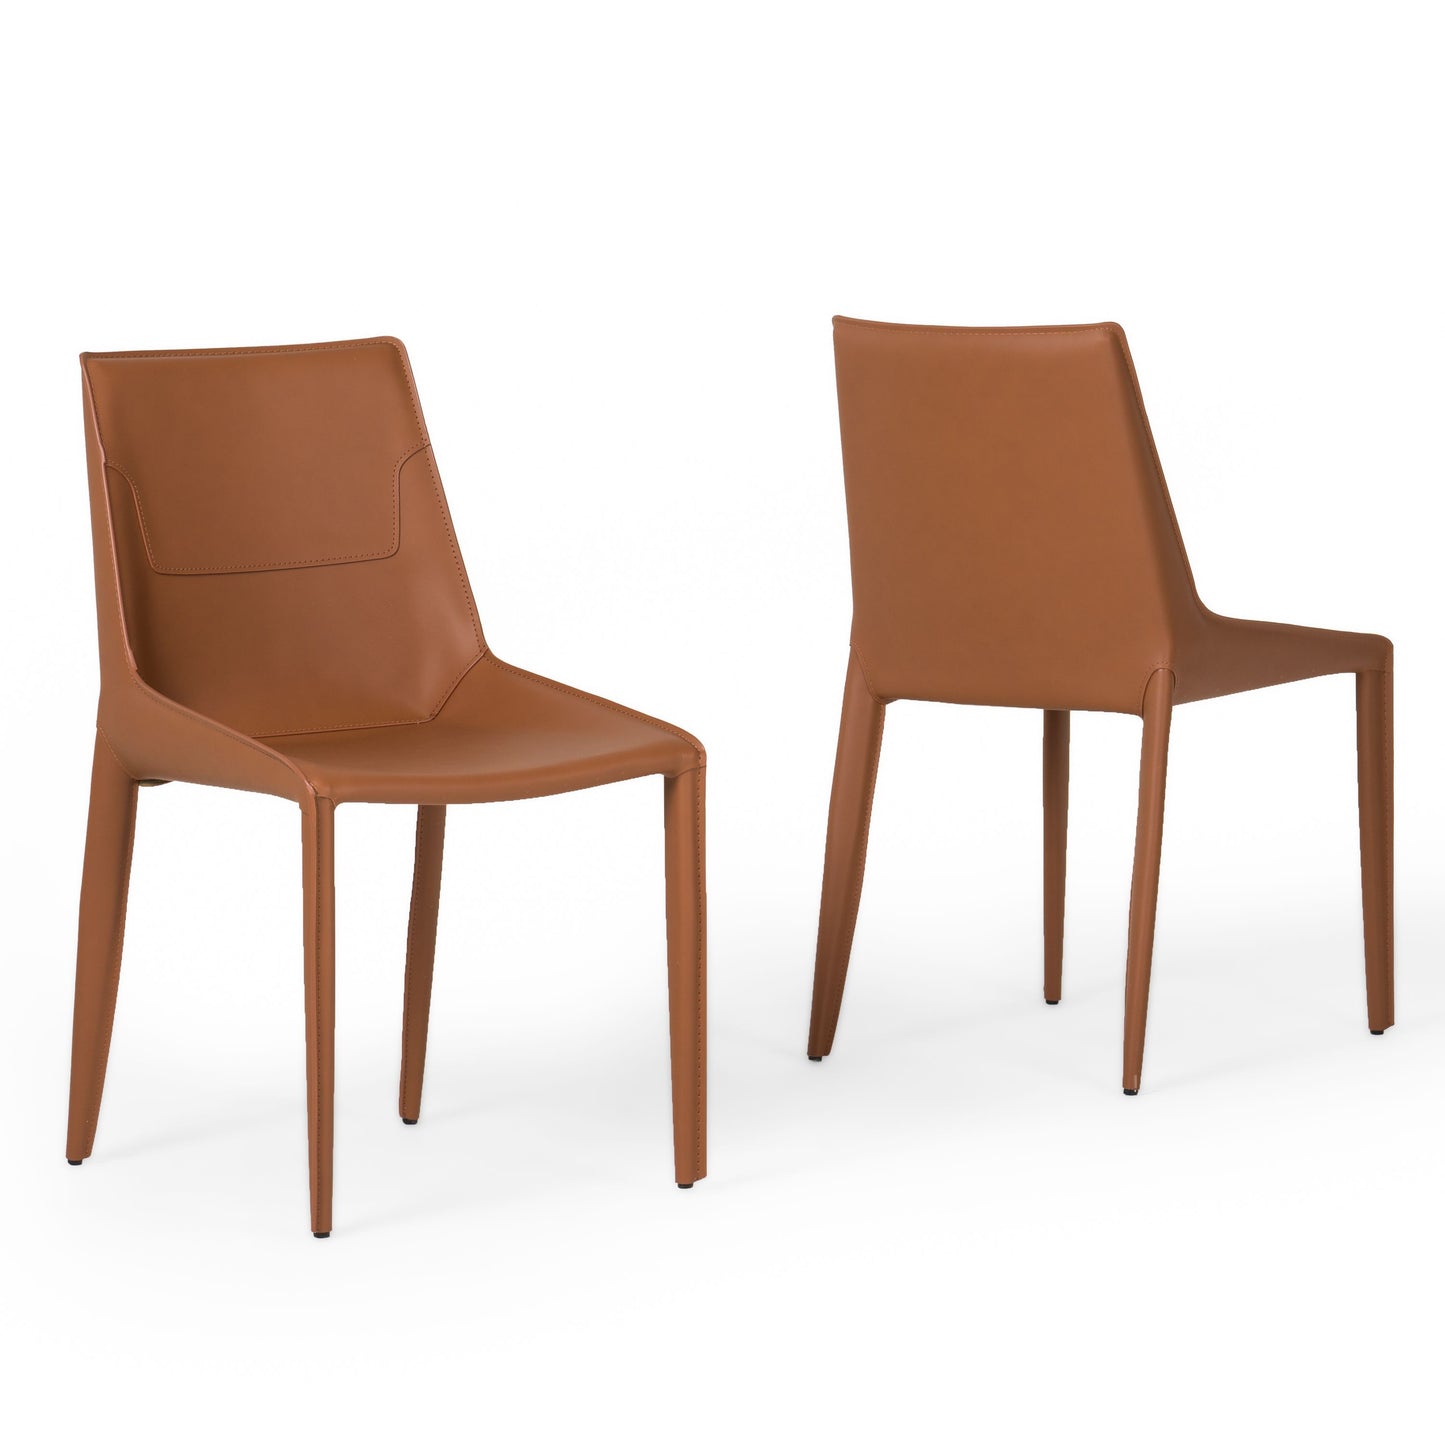 Modrest Halo - Modern Cognac Saddle Leather Dining Chair Set of Two